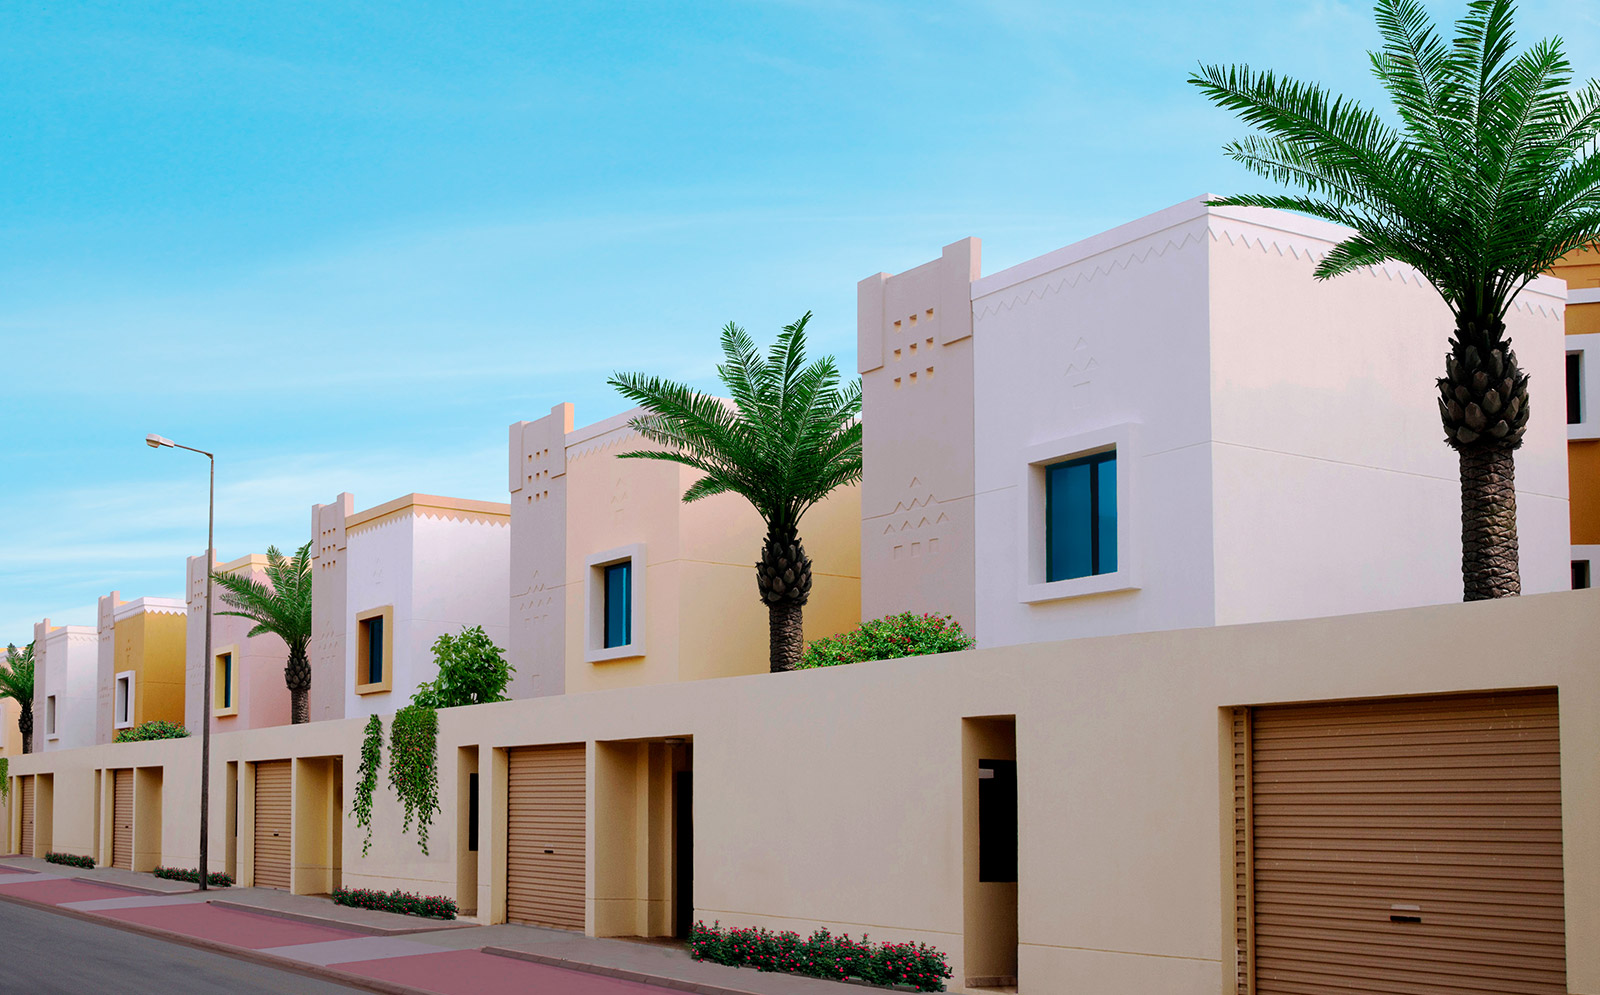 Dar Al Arkan Participates in the Exhibition "Your house is ready" for Real Estate Investors